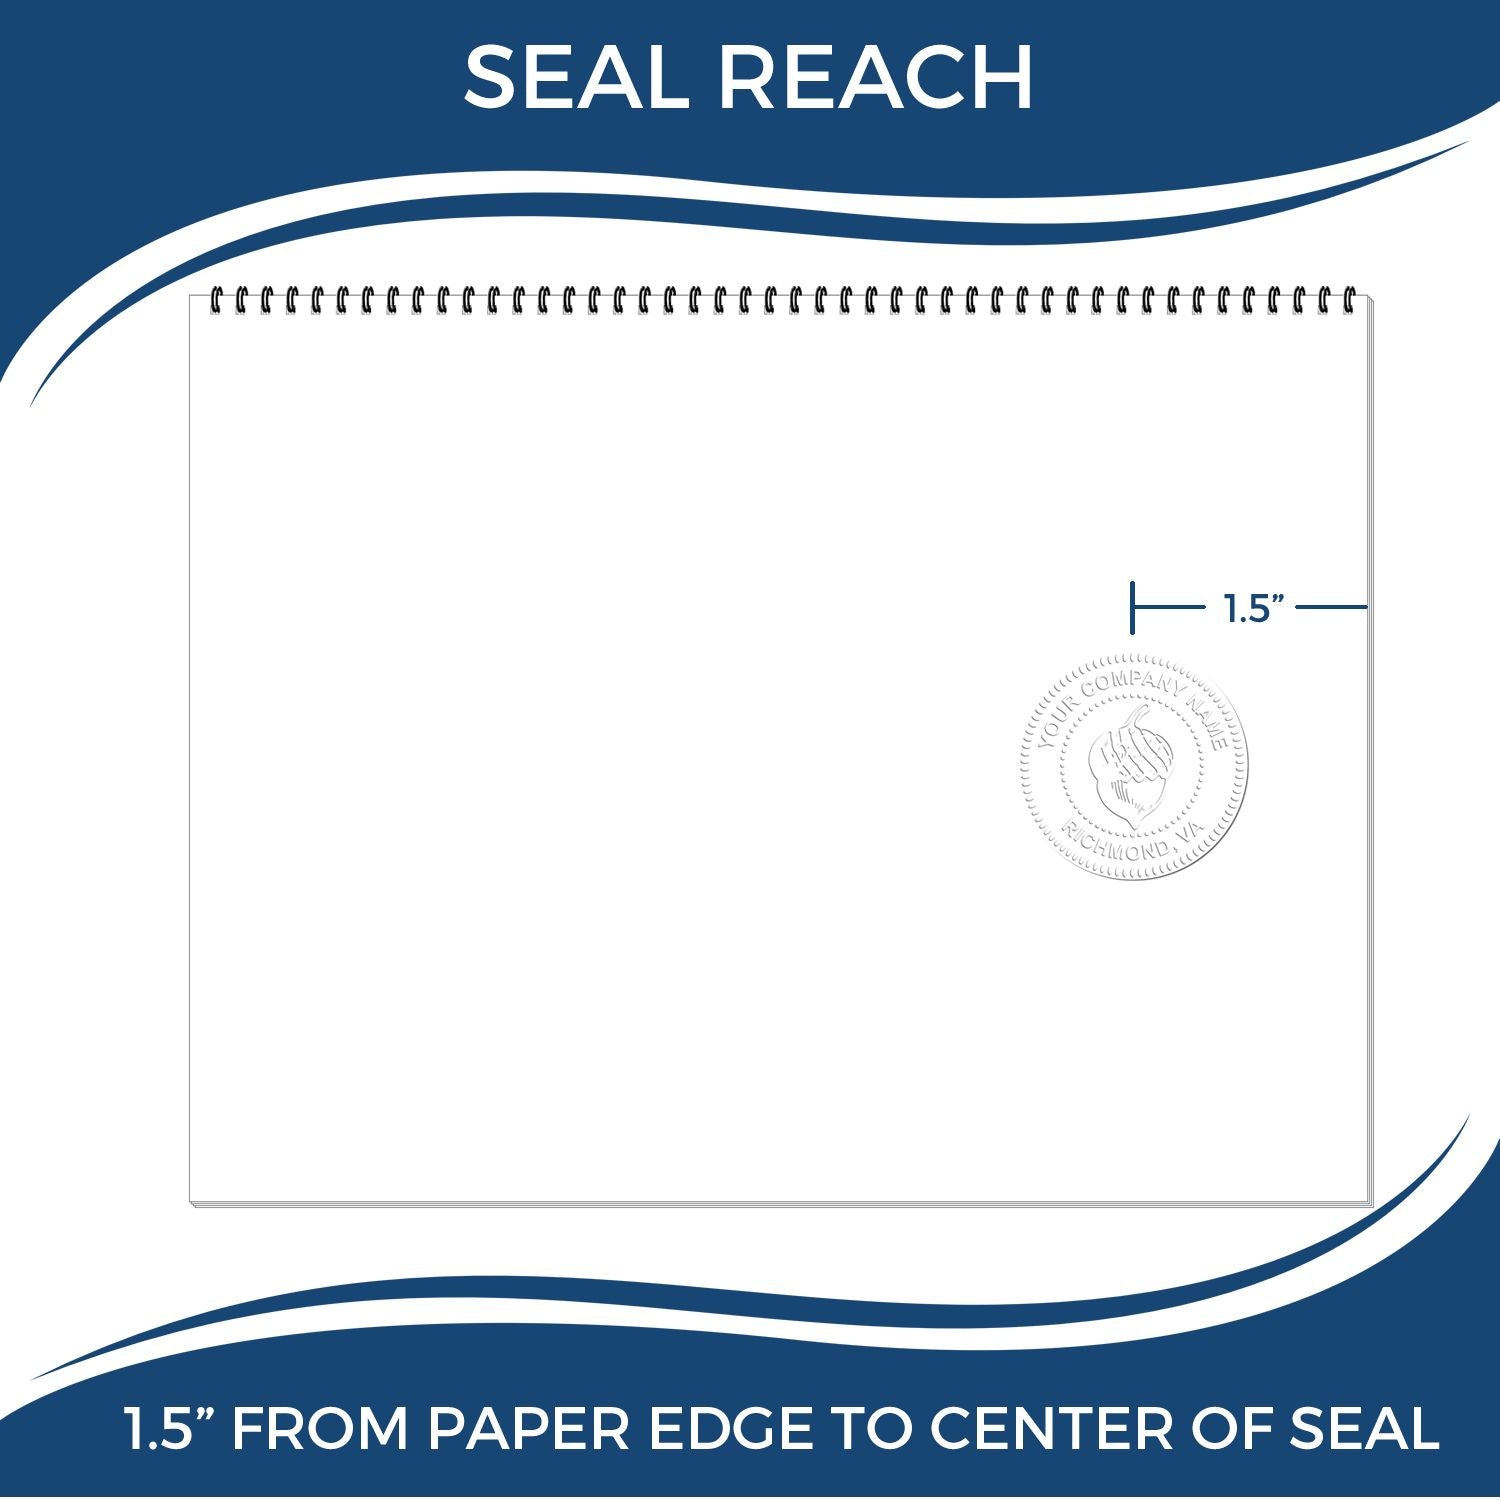 An infographic showing the seal reach which is represented by a ruler and a miniature seal image of the Handheld Oregon Professional Engineer Embosser